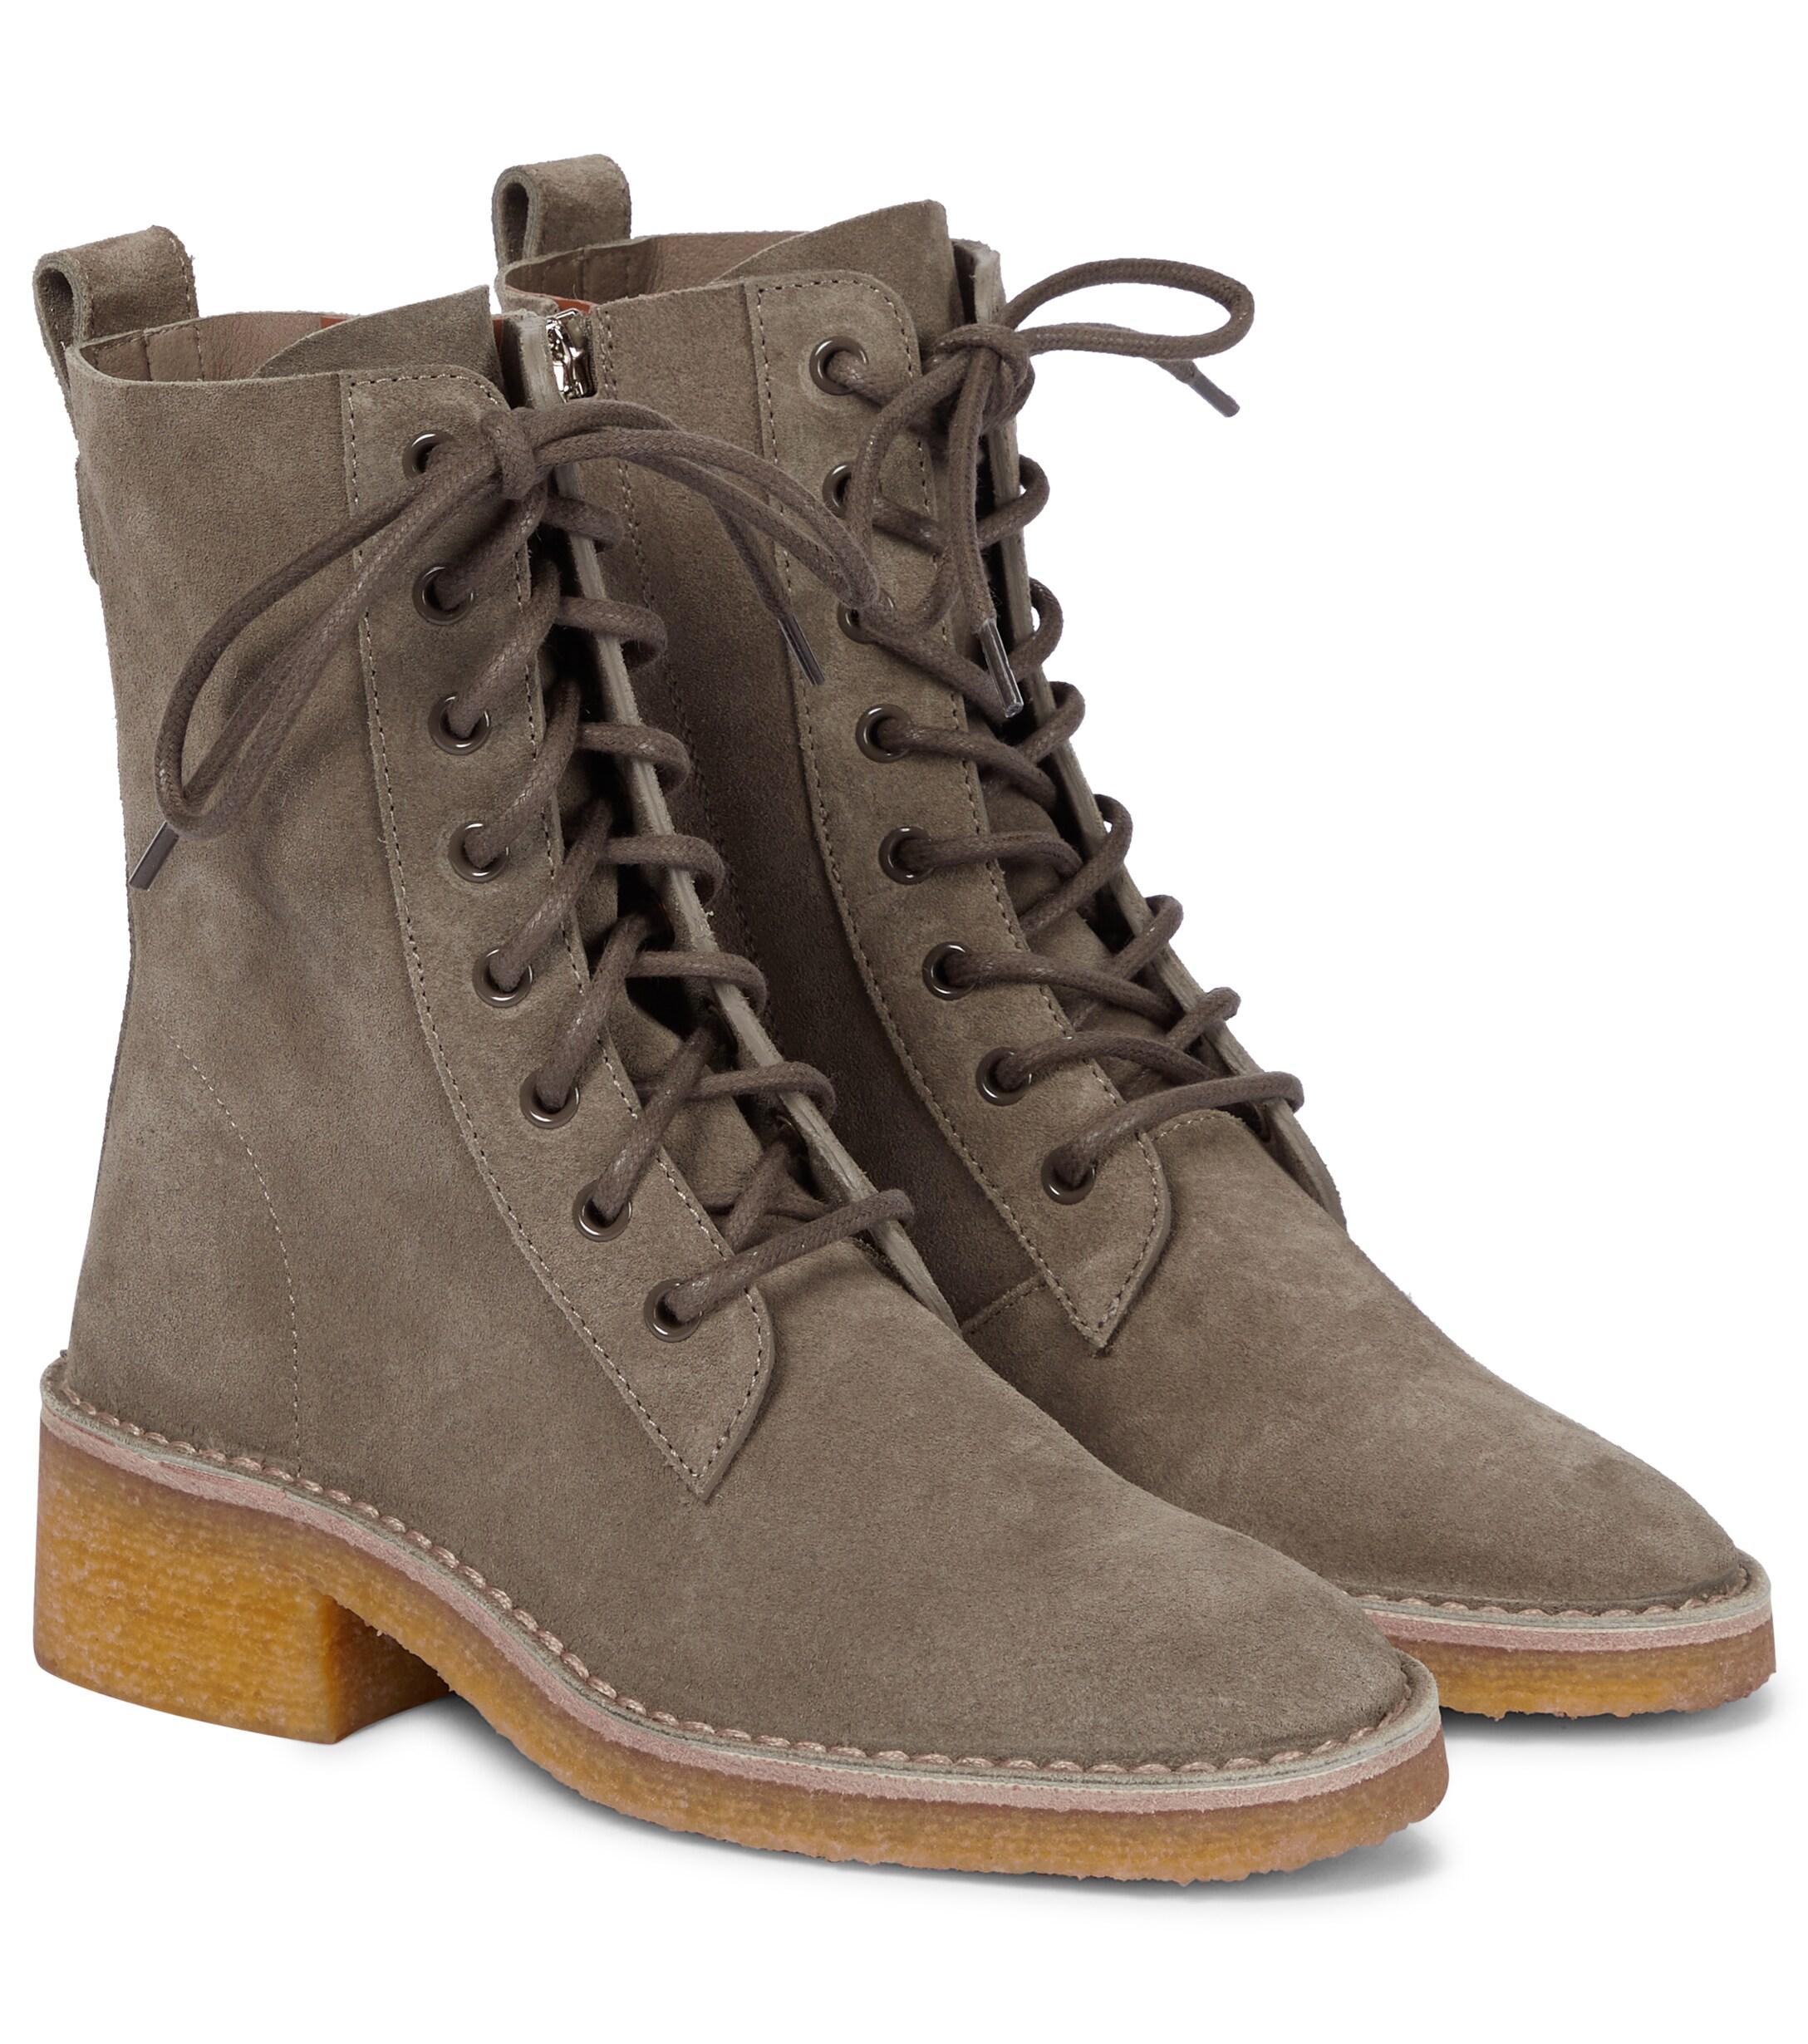 Chloé Edith Suede Combat Boots in Grey (Gray) - Lyst